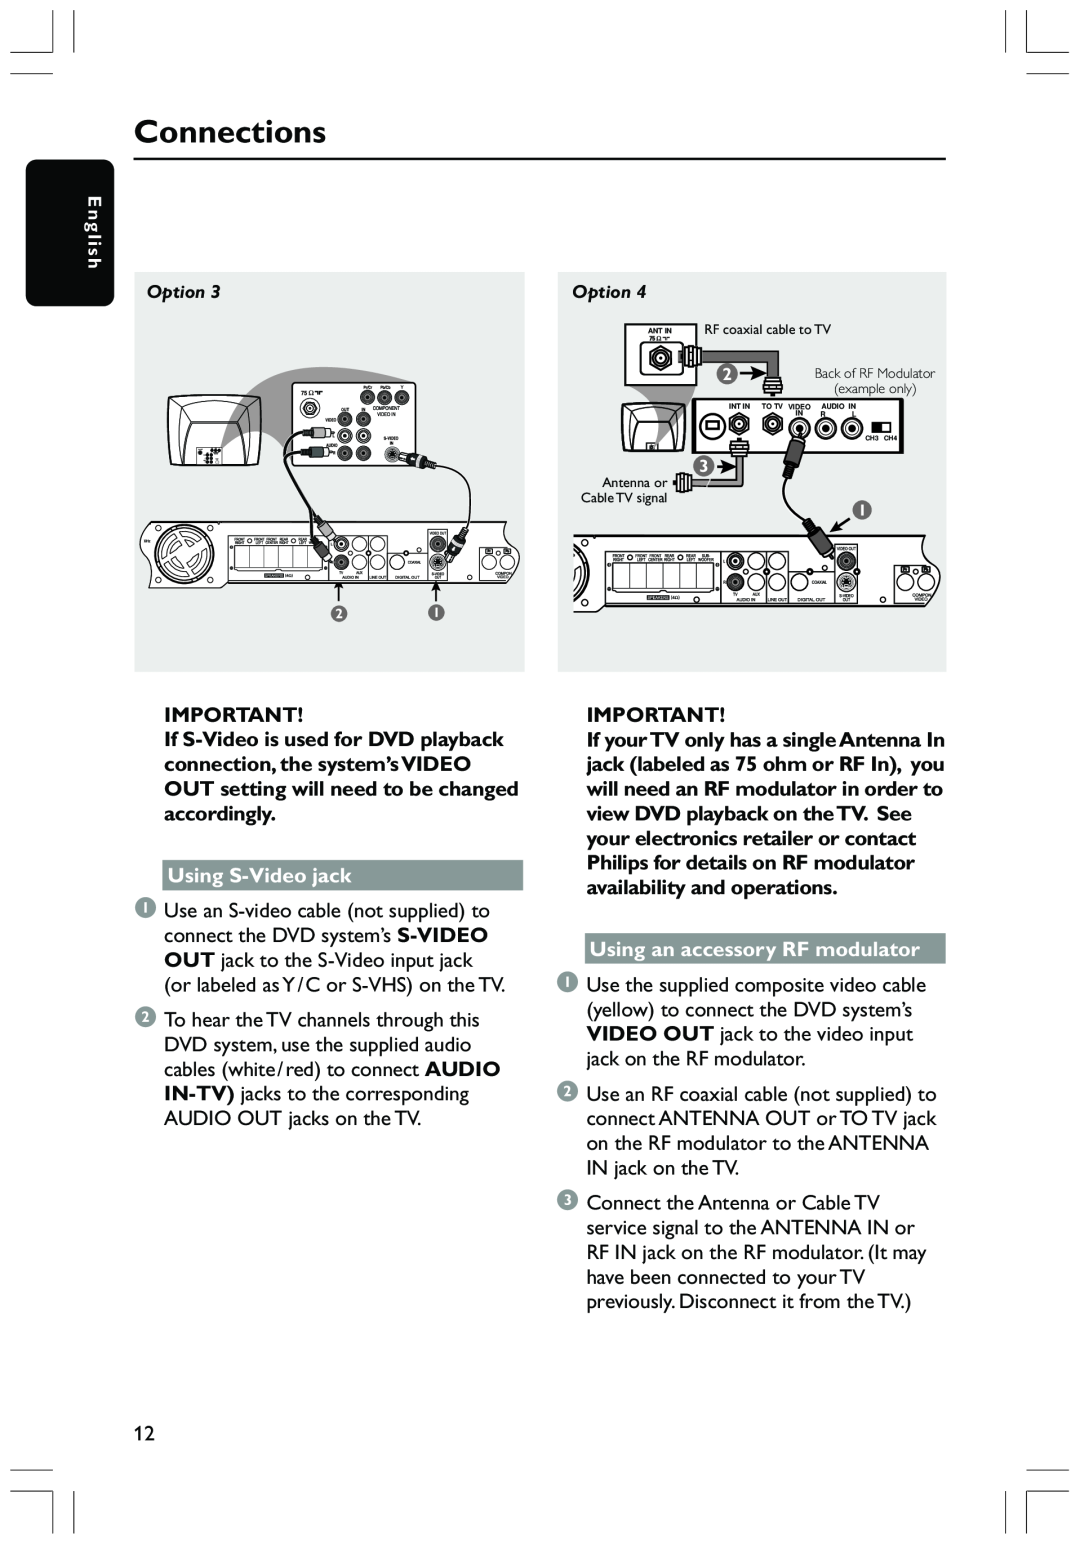 Philips HTS3410D user manual Connections, Using S-Videojack, Using an accessory RF modulator, Option 